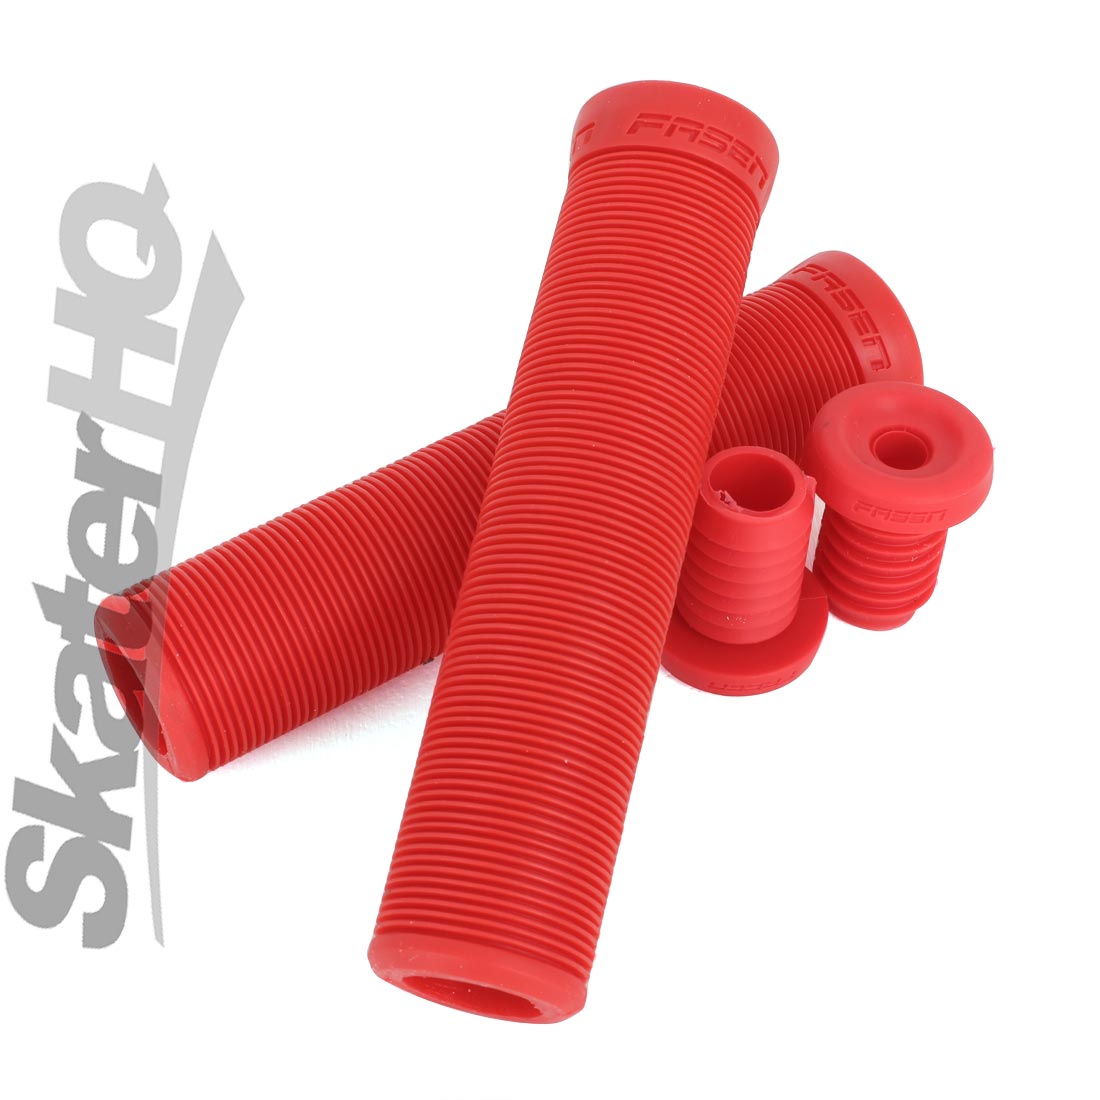 Fasen Handle Grips - Red Scooter Grips